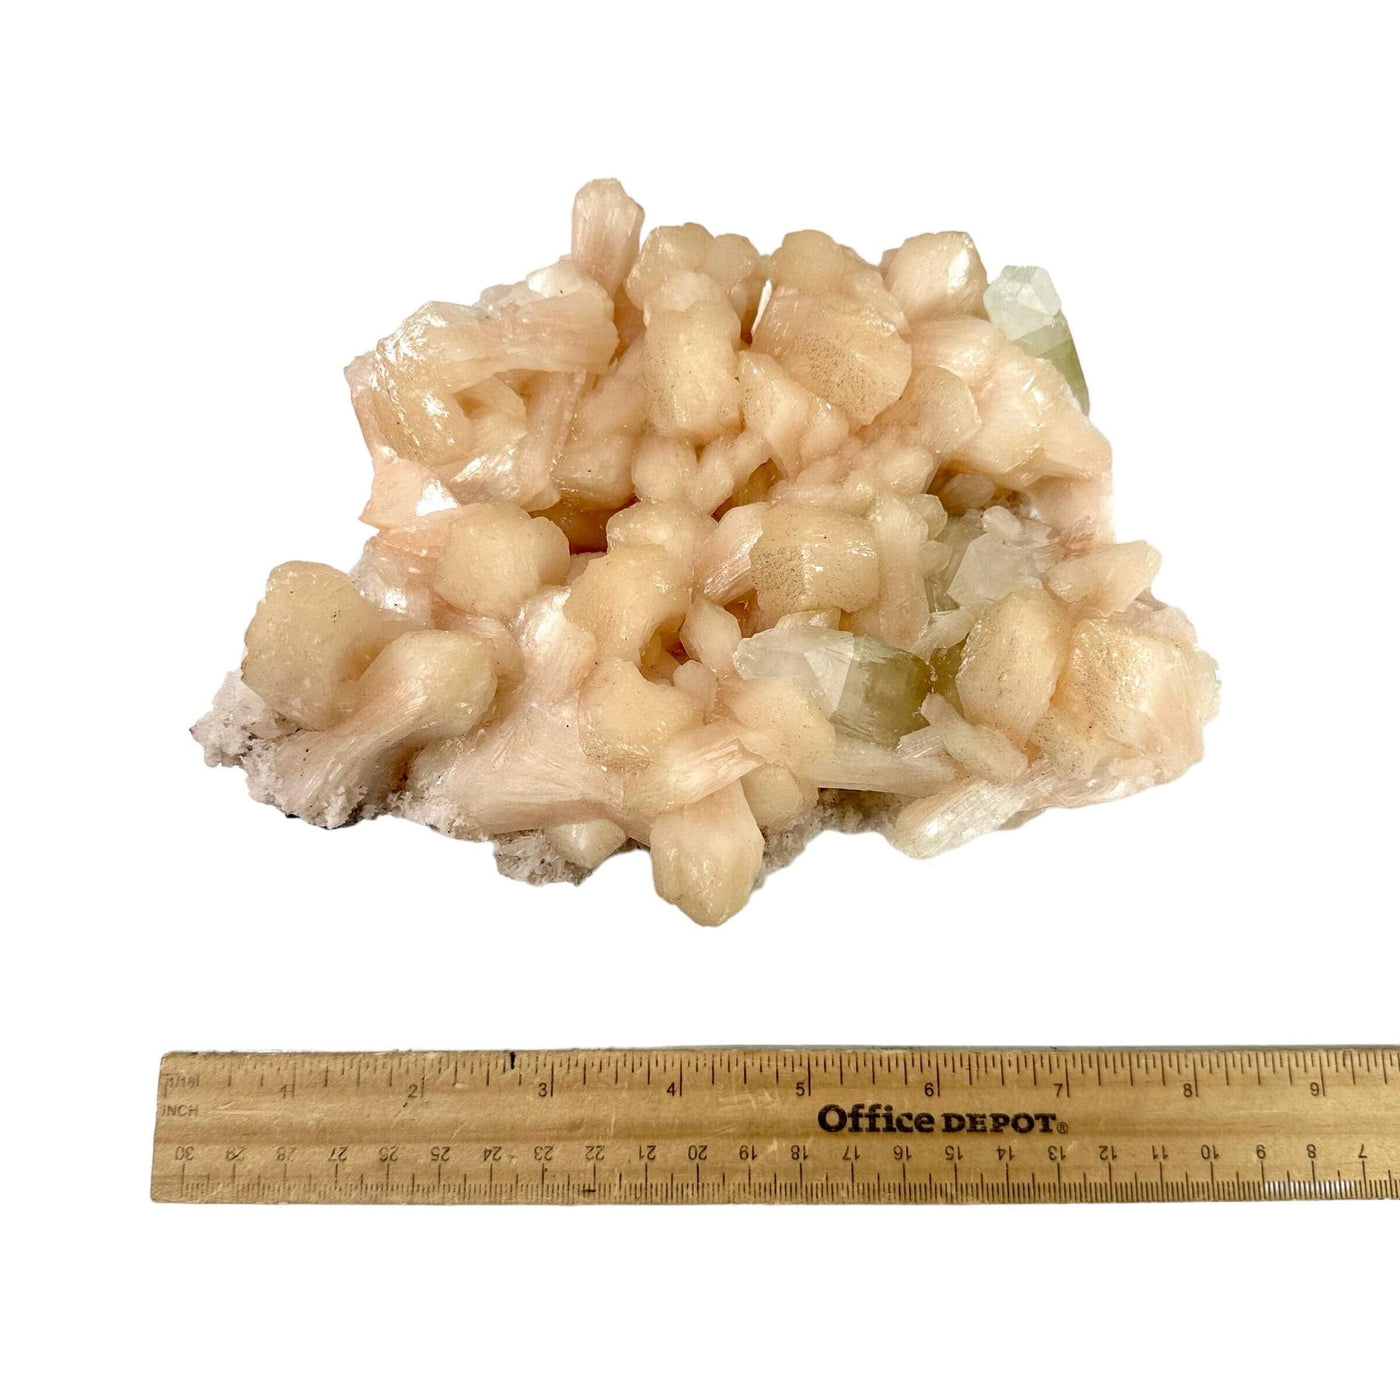 Peach Stilbite with Apophyllite and Zeolite - Museum Quality - Crystal Cluster with ruler for size reference